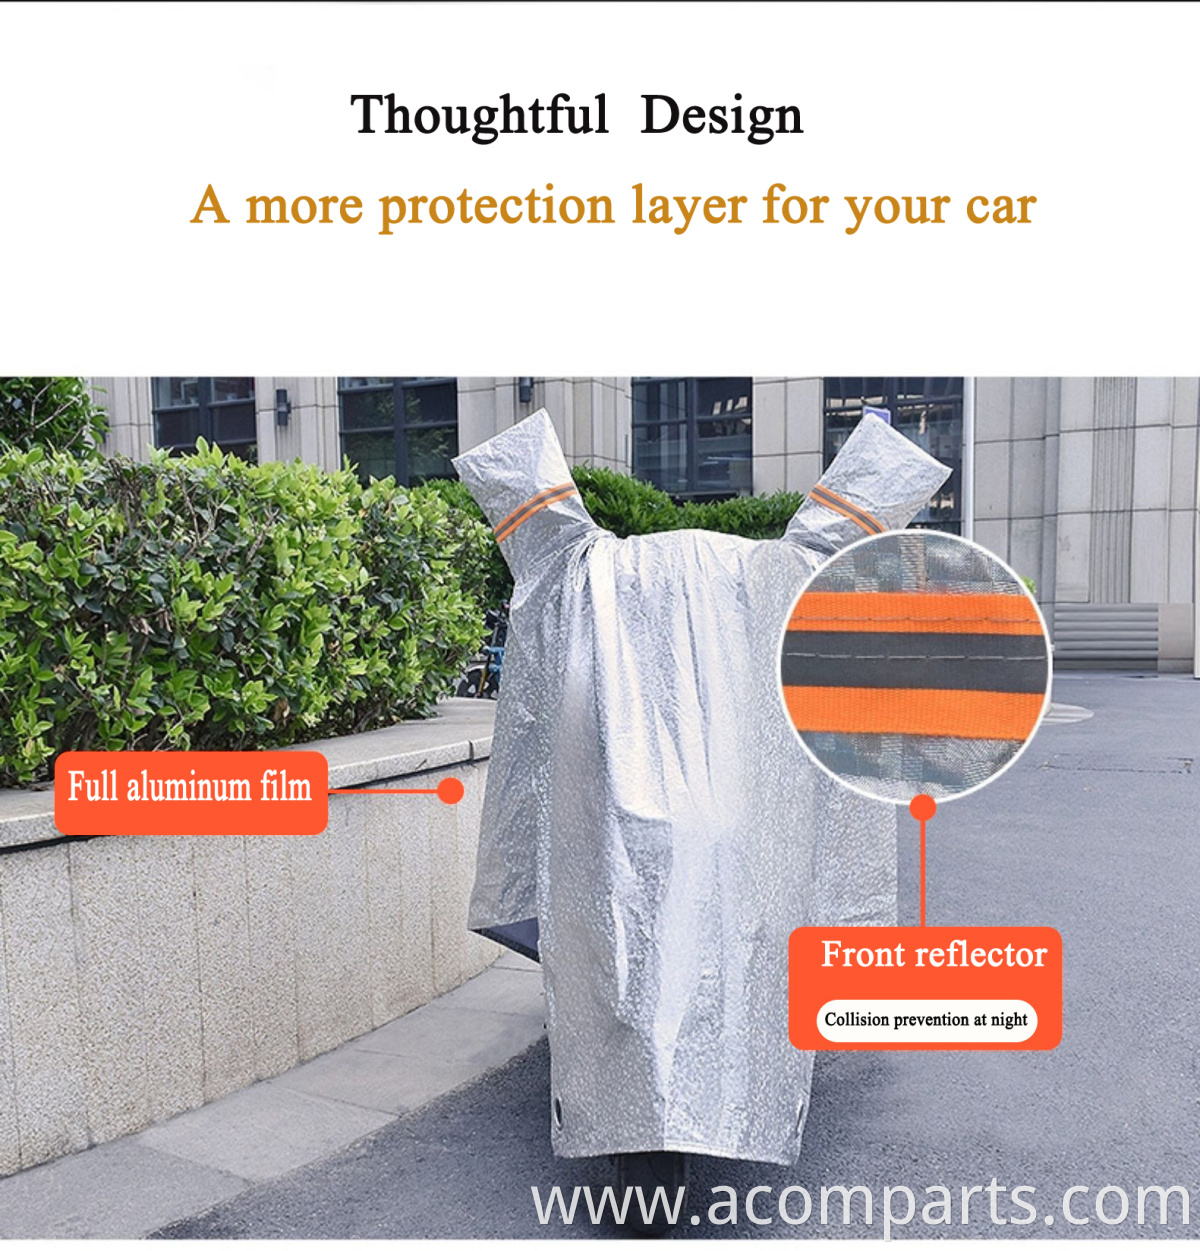 PEVA material durable outdoor all season waterproof sun uv protection motorcycle cover with inner lining